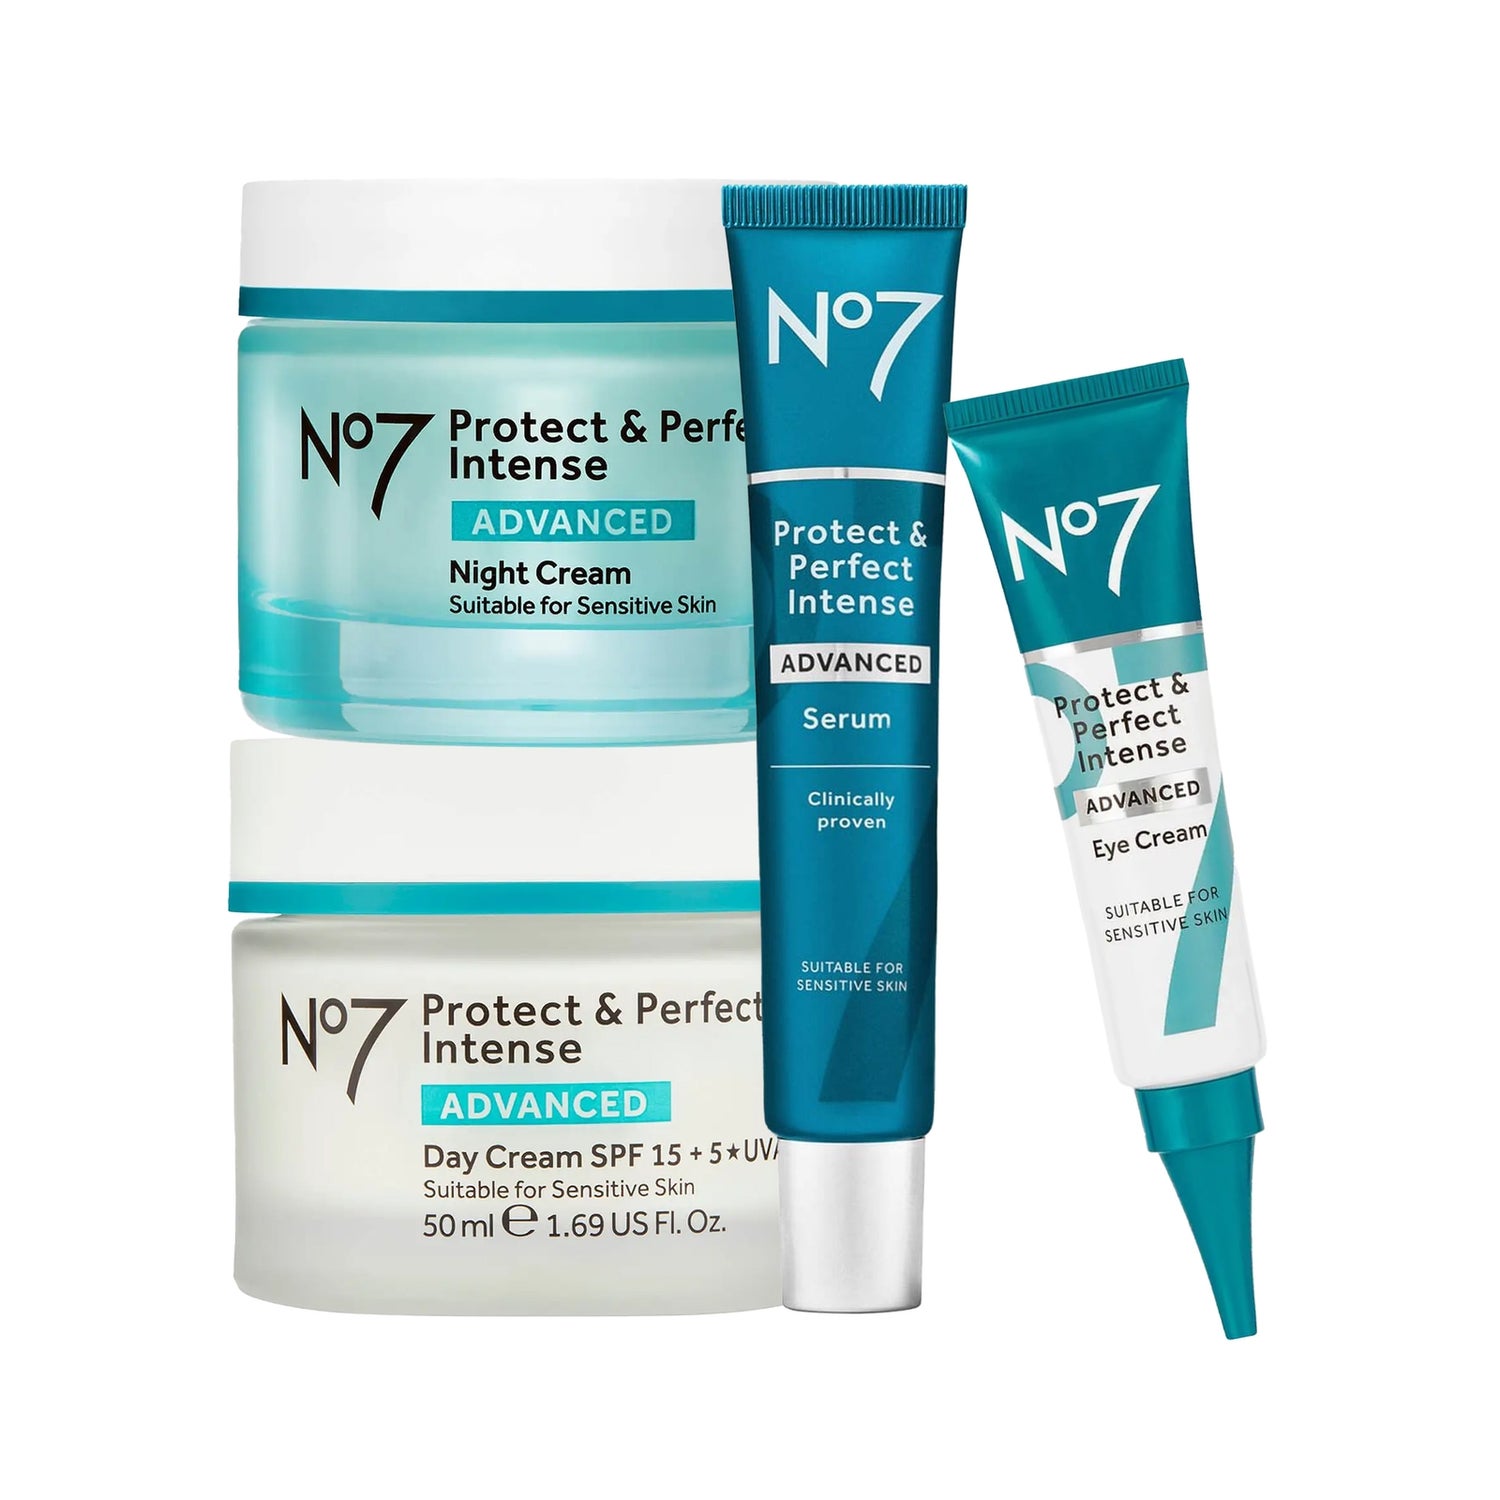 Protect & Perfect Complete Skincare Collection